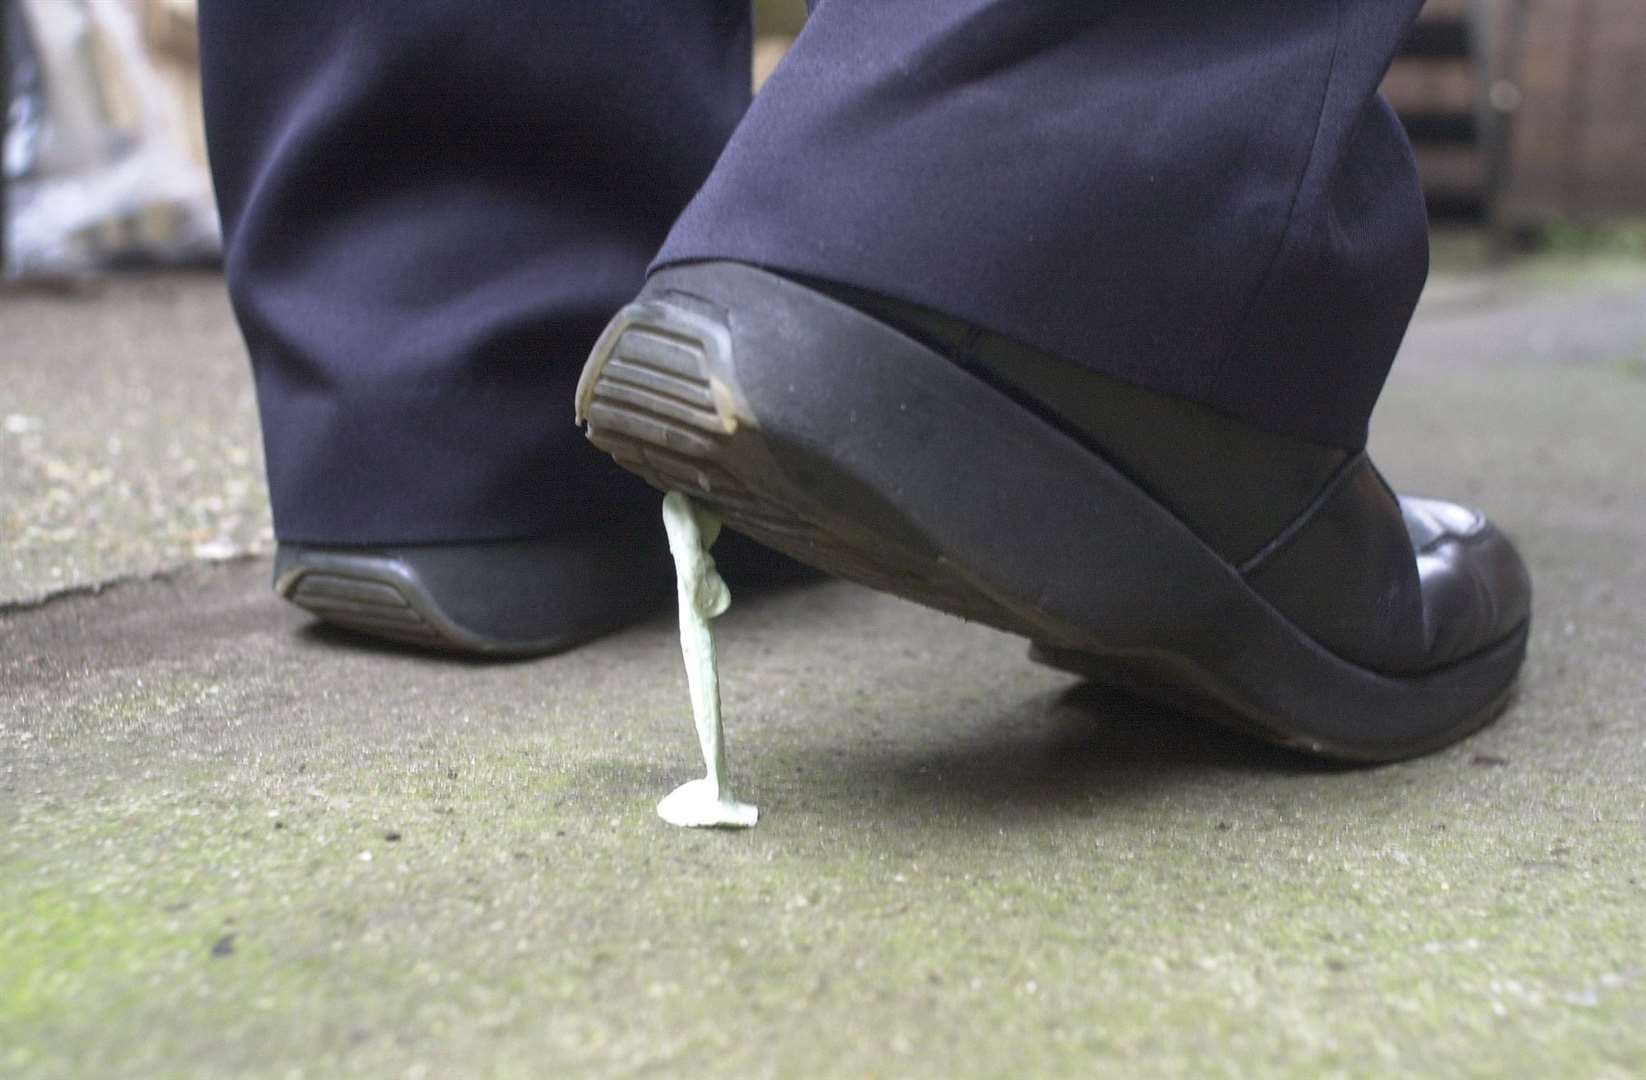 The amount of discarded chewing gum costs thousands to clear